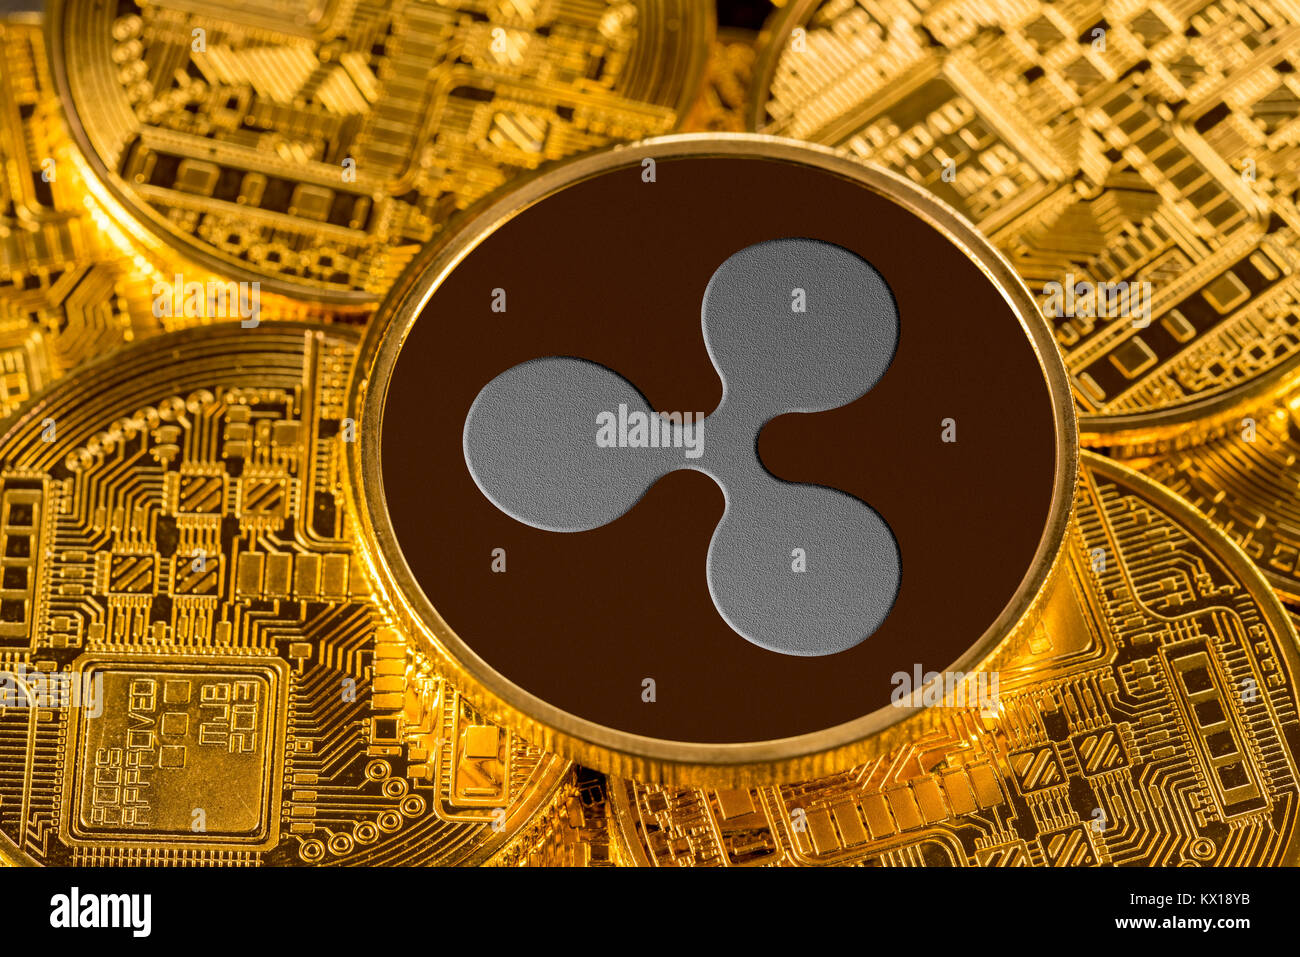 Illustration of Ripple coin with gold background Stock Photo